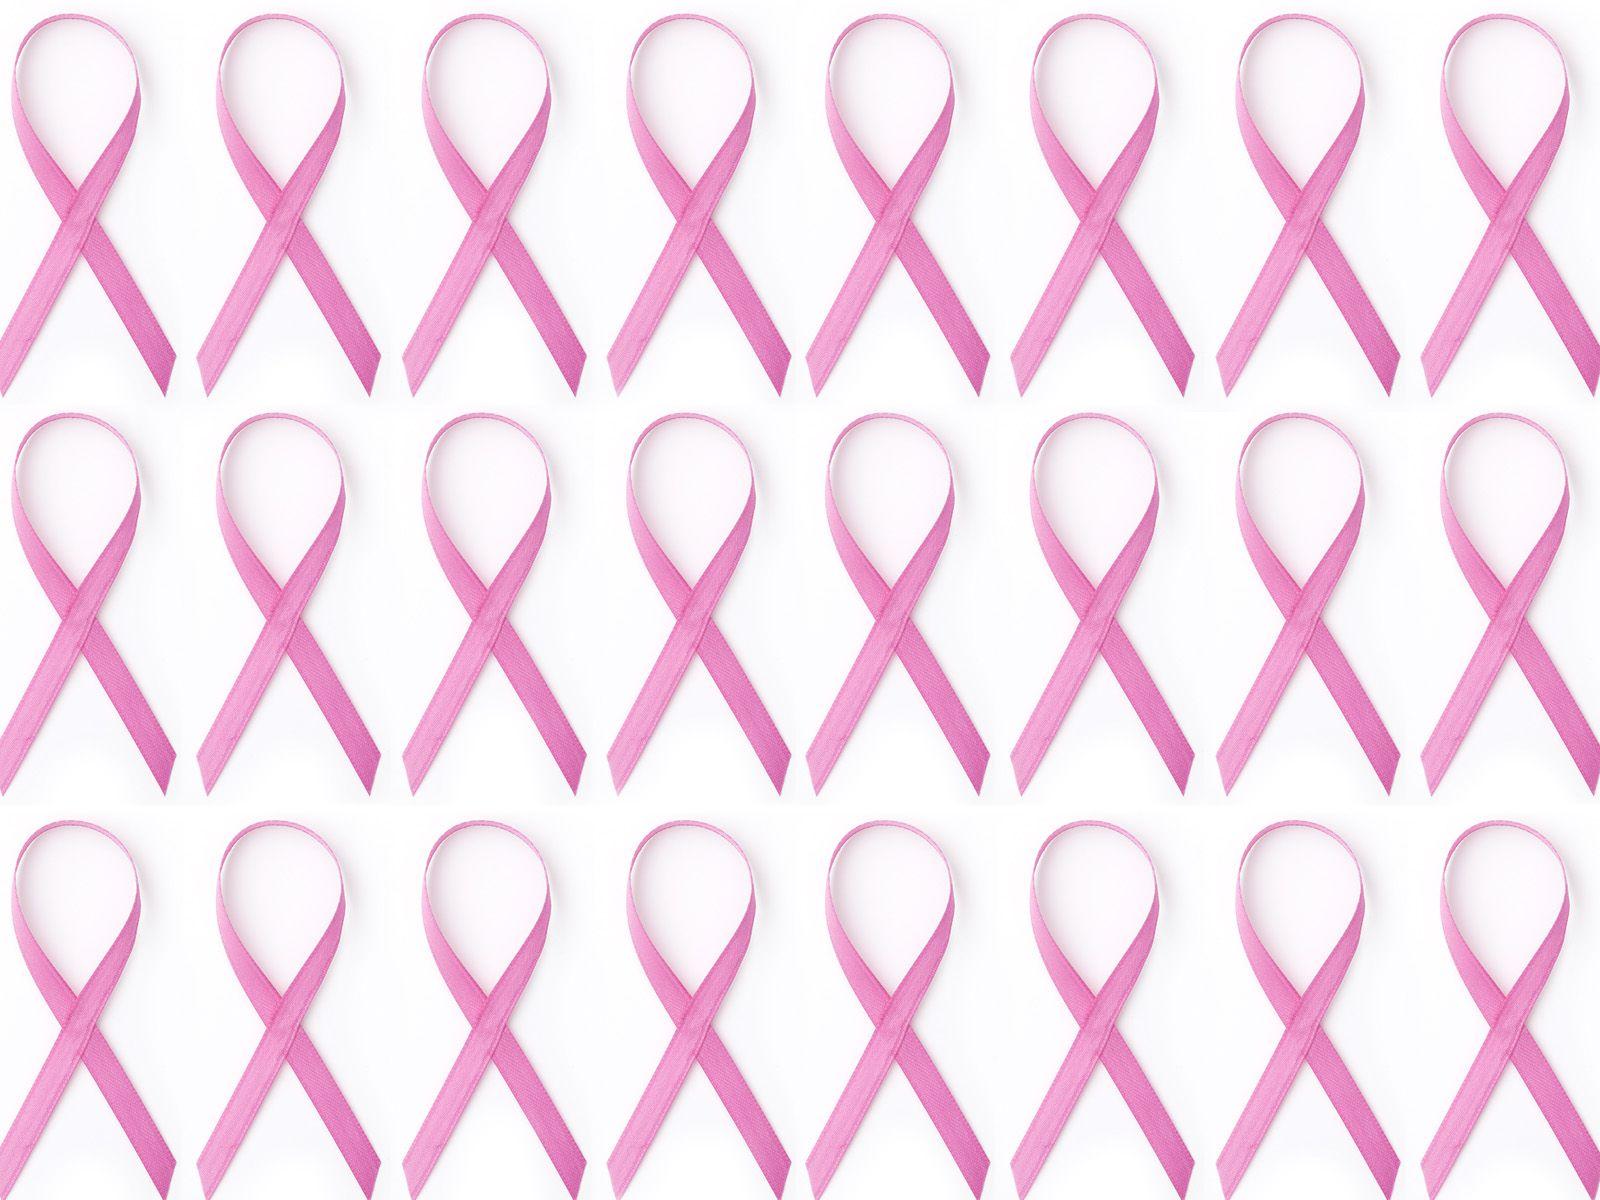 Breast Cancer Awareness Month Just Made Us Aware Of America's